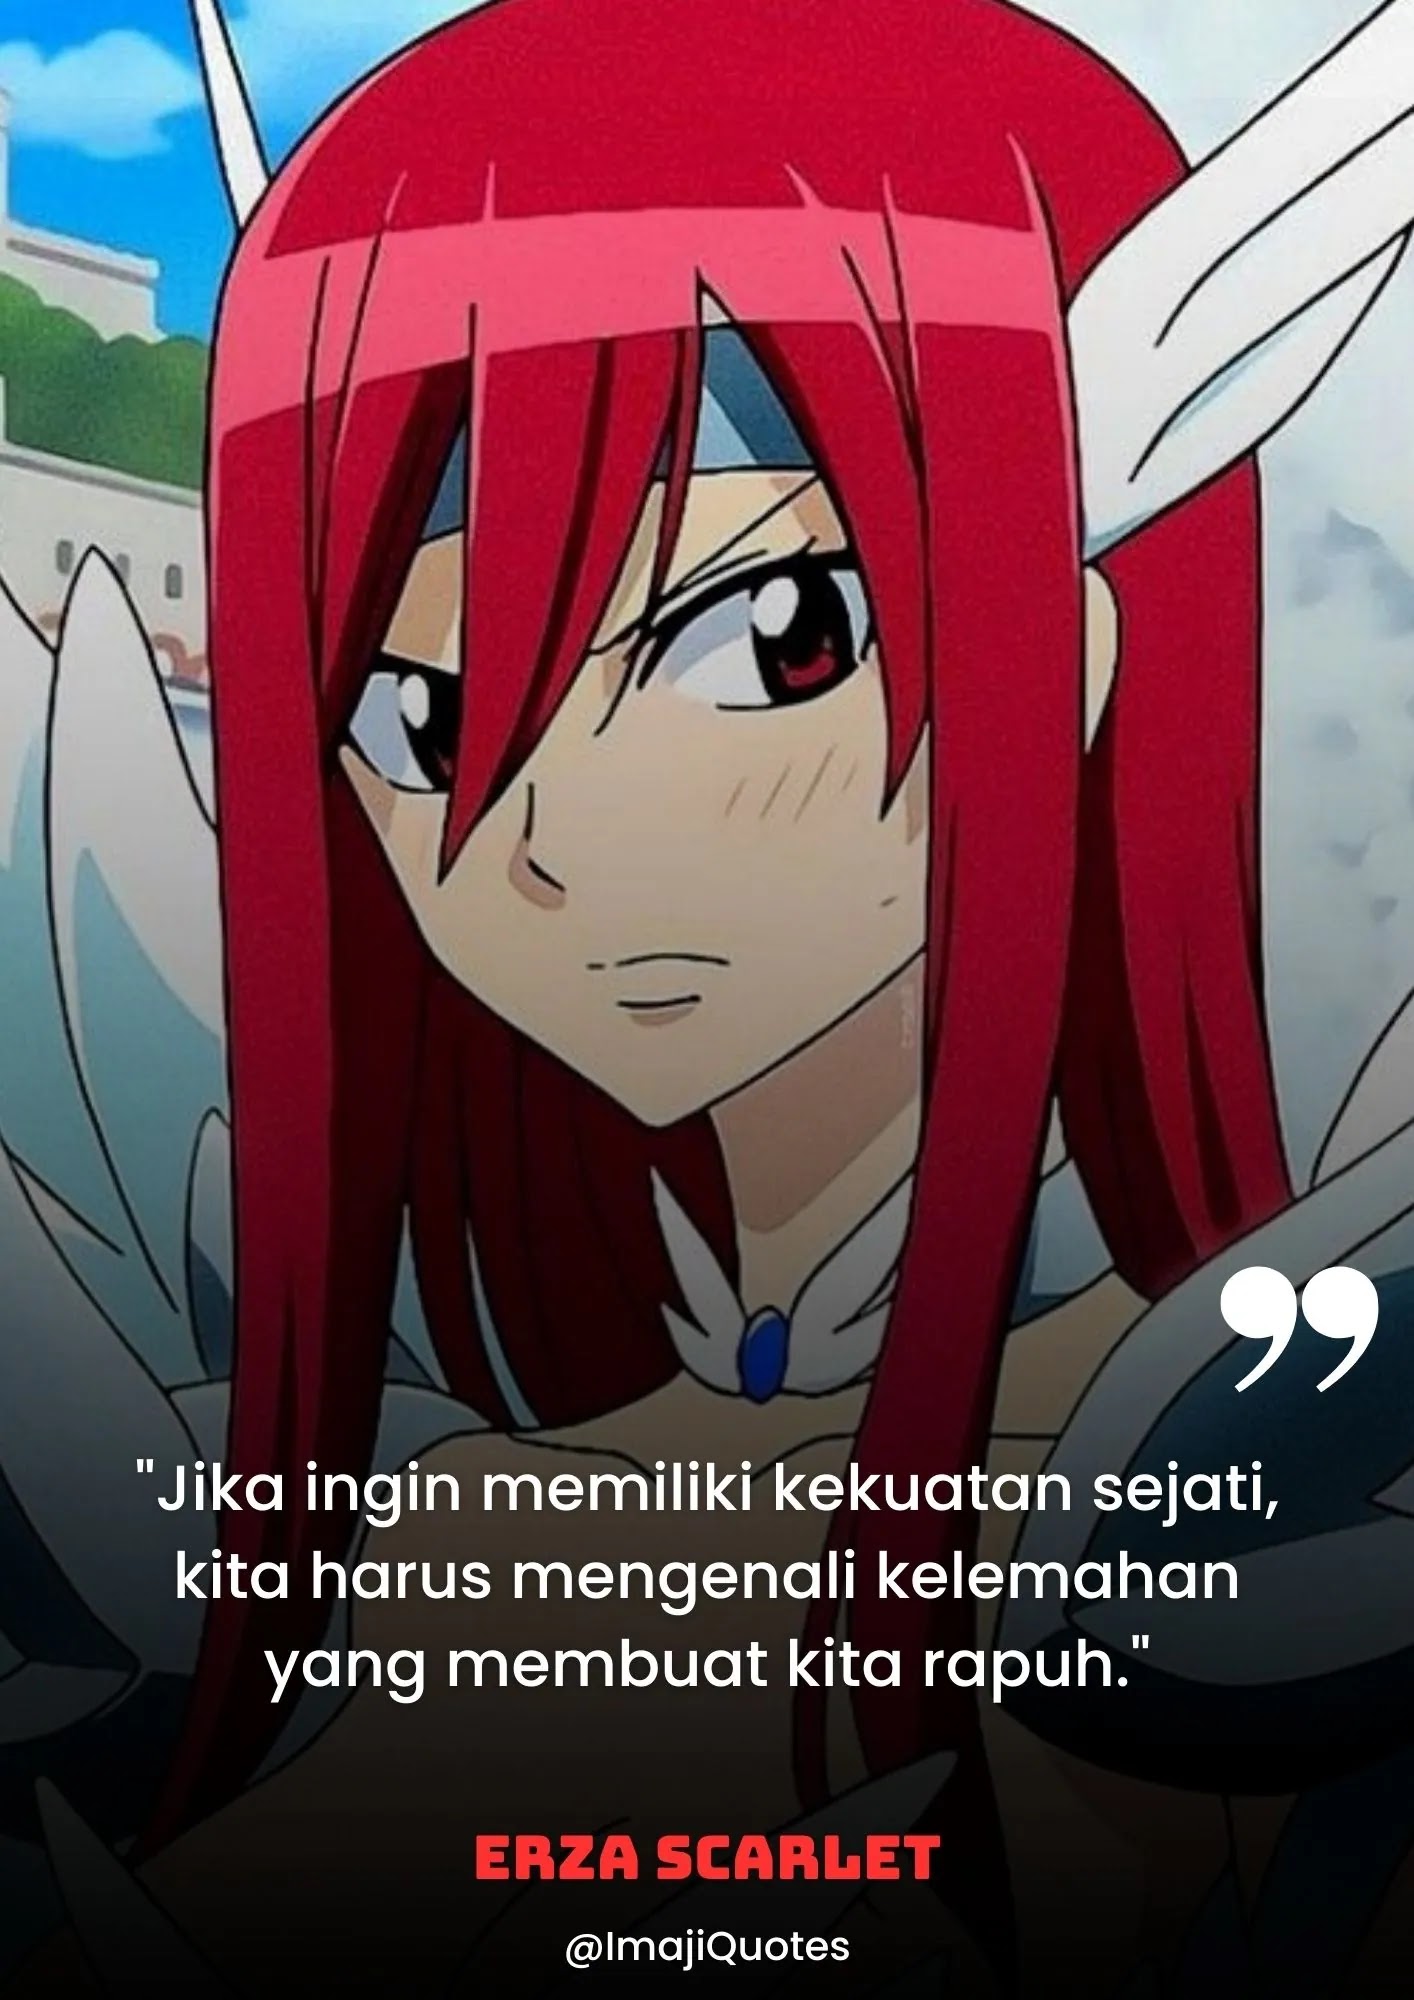 Quote Erza Scarlet (Fairy Tail)